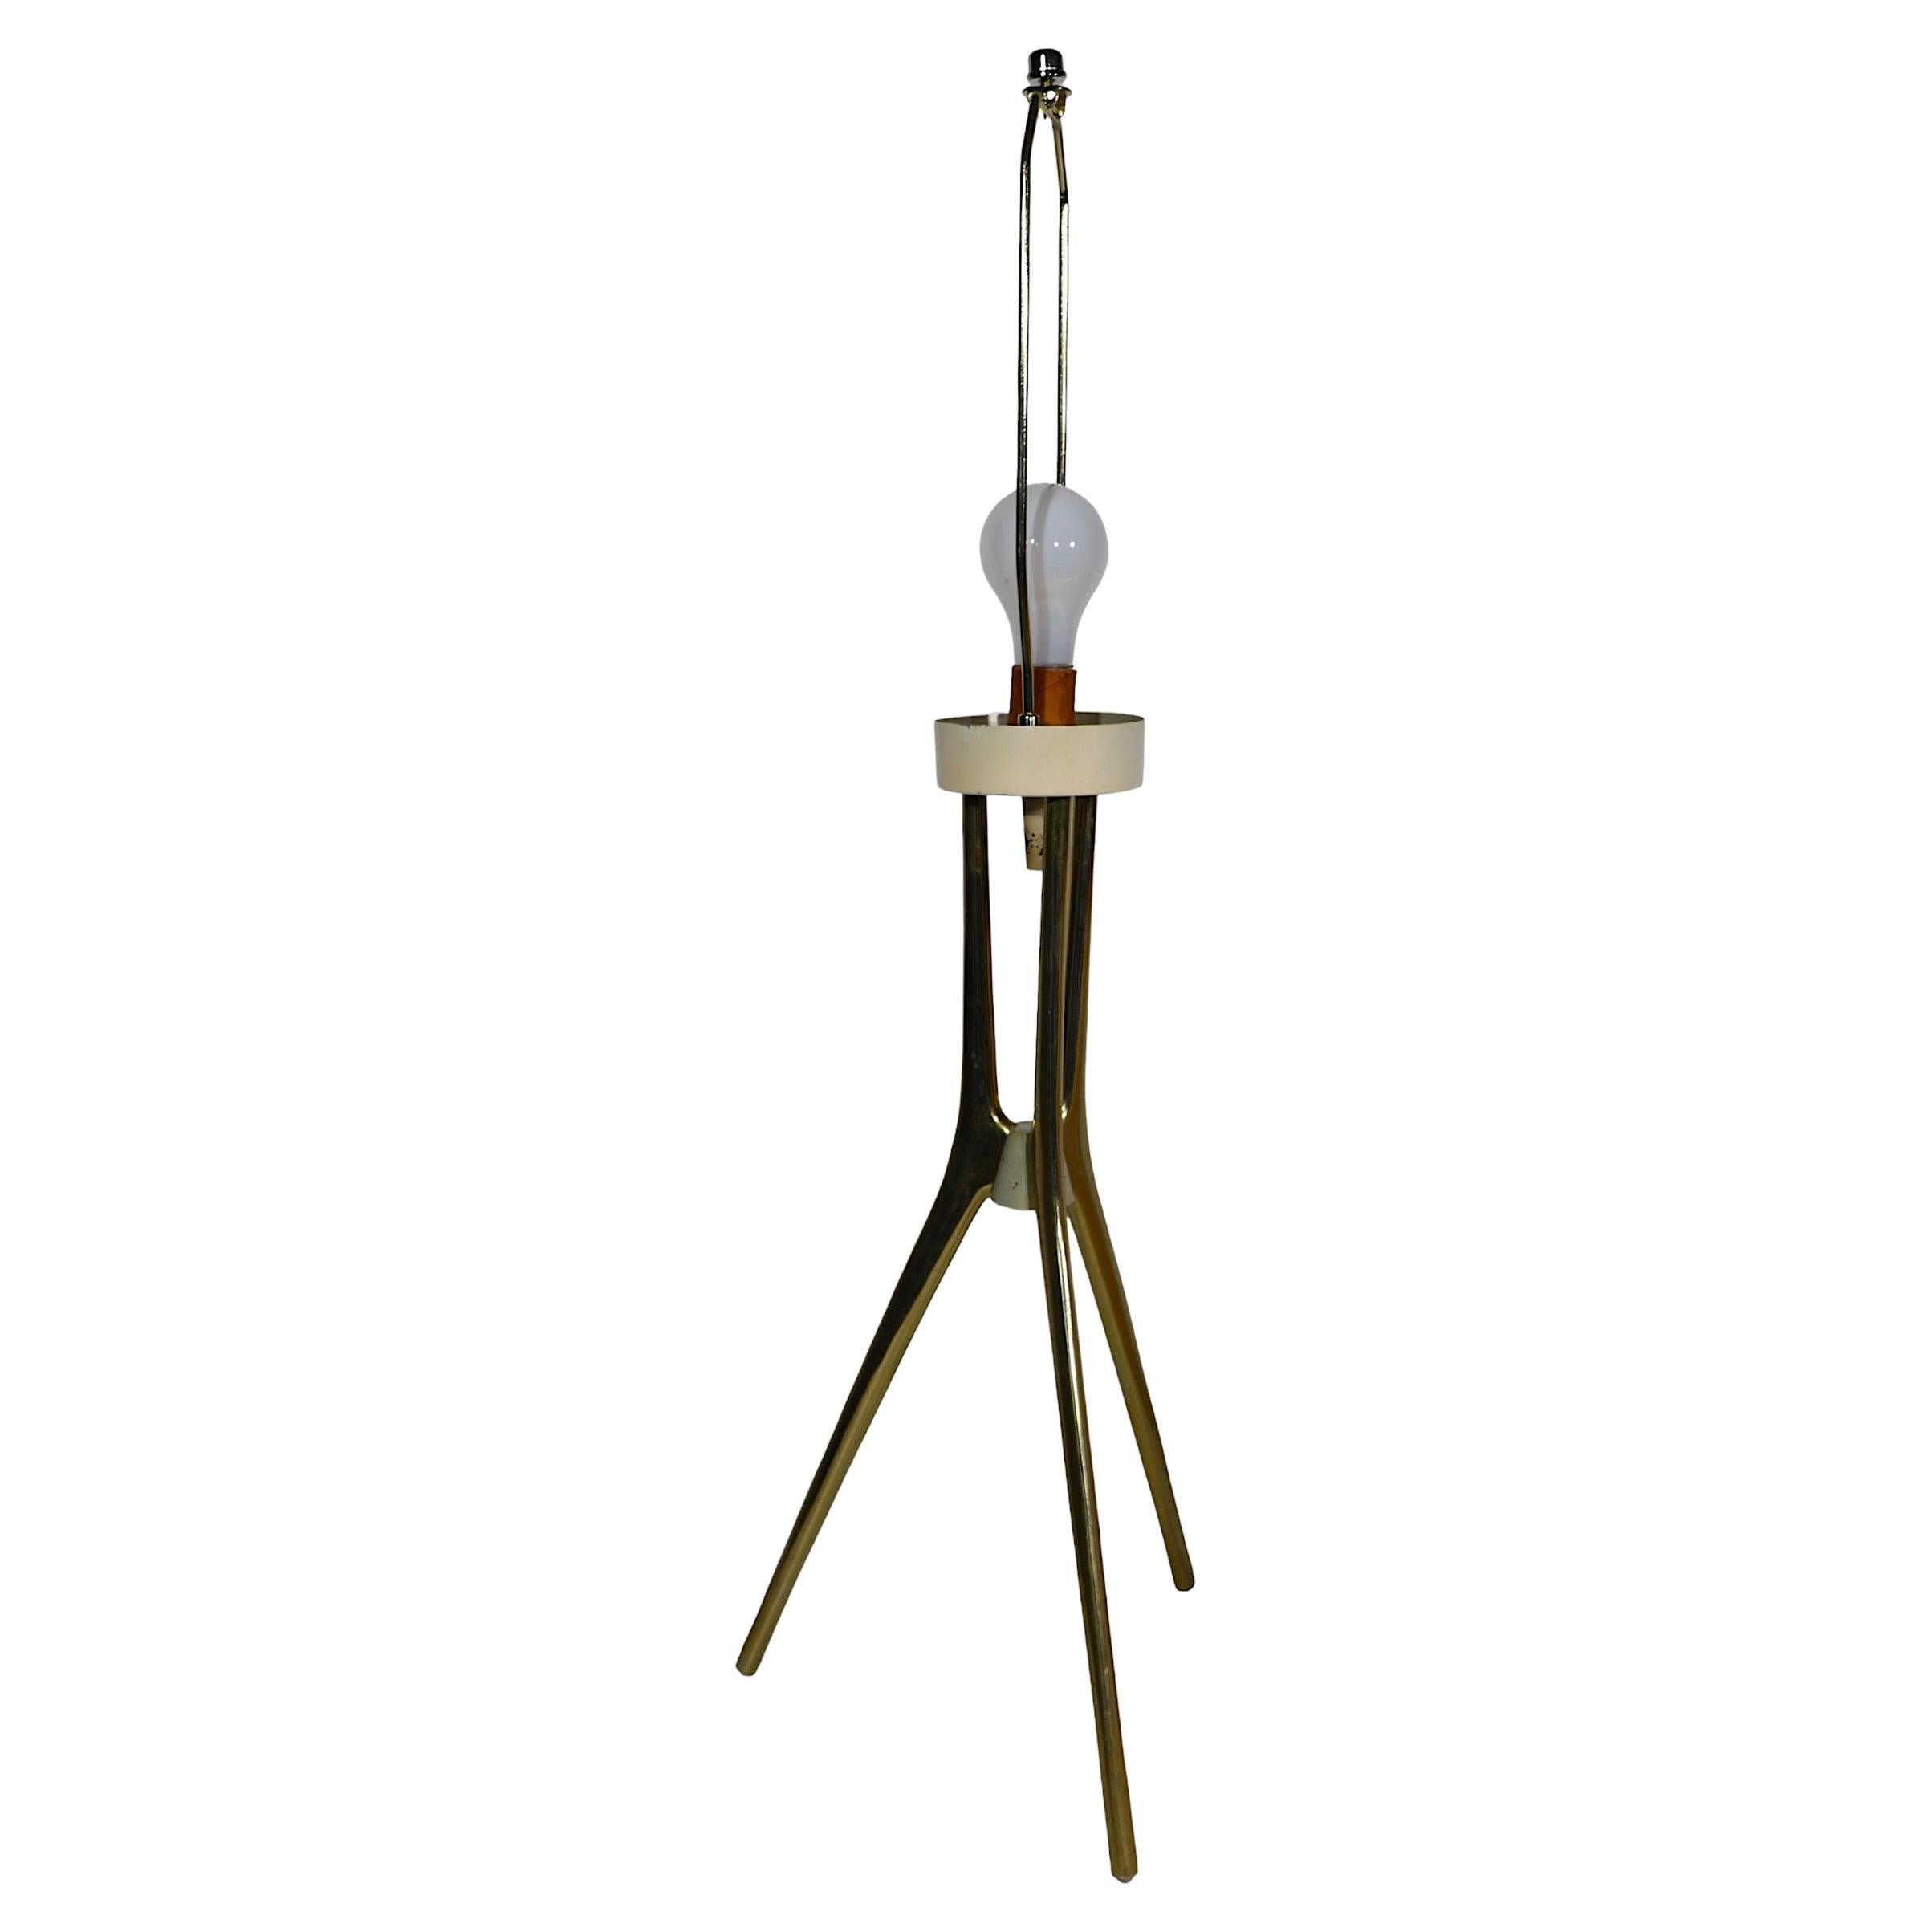 Architectural Mid Century, Atomic, Space Age jack form table lamp, by Lightolier, design attributed to Gerald Thurston. The lamp features a tripod base of elegant sculptural brass legs, the harp and finial which hold the shade  are later